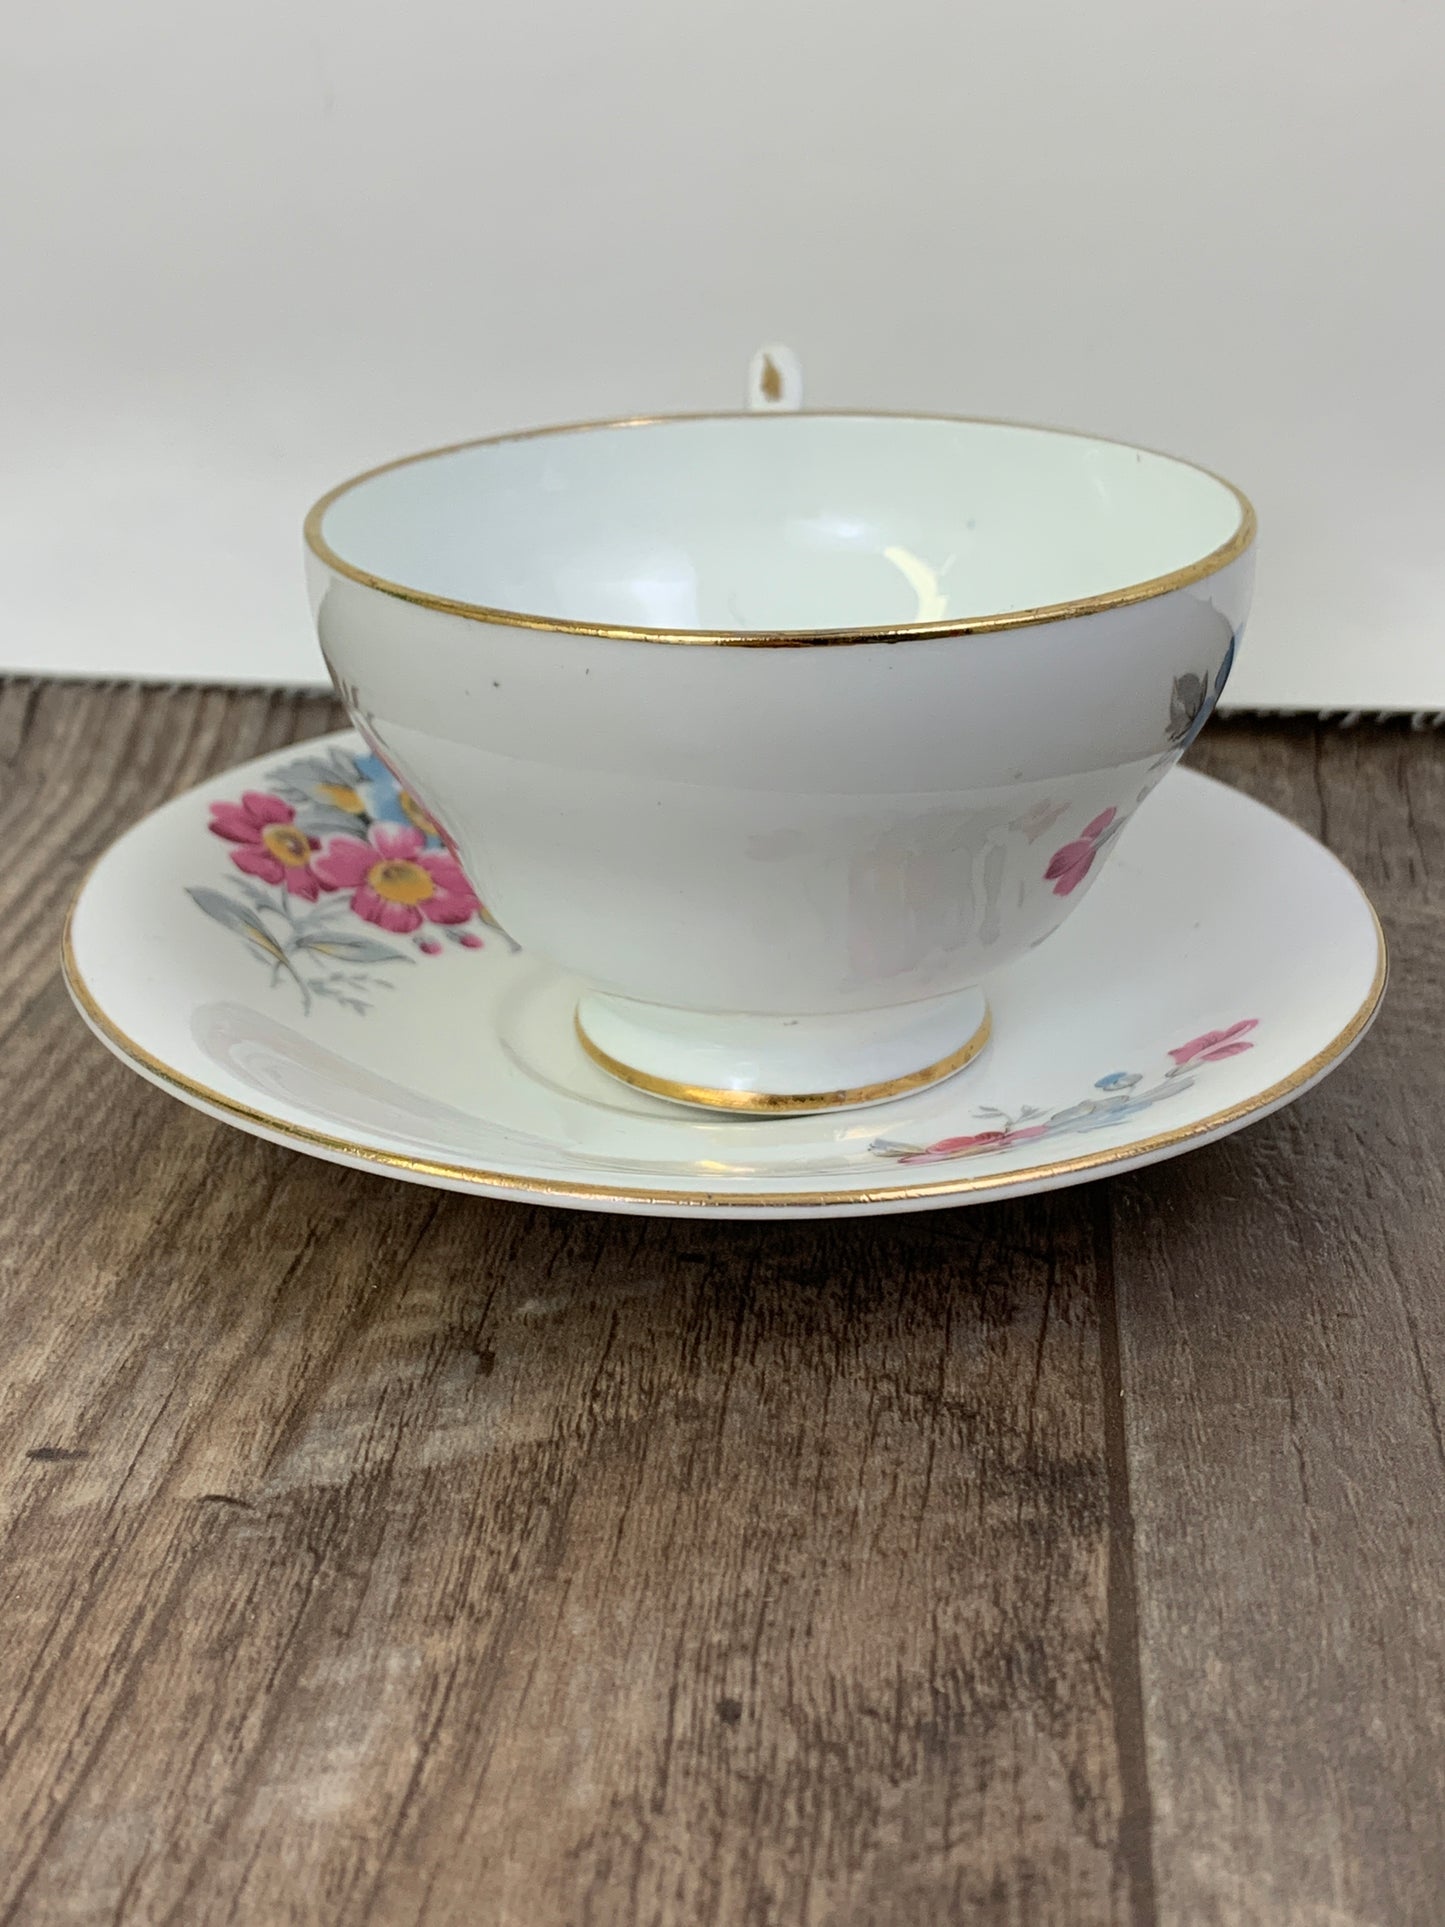 Vintage English Teacup with Pink Floral Pattern